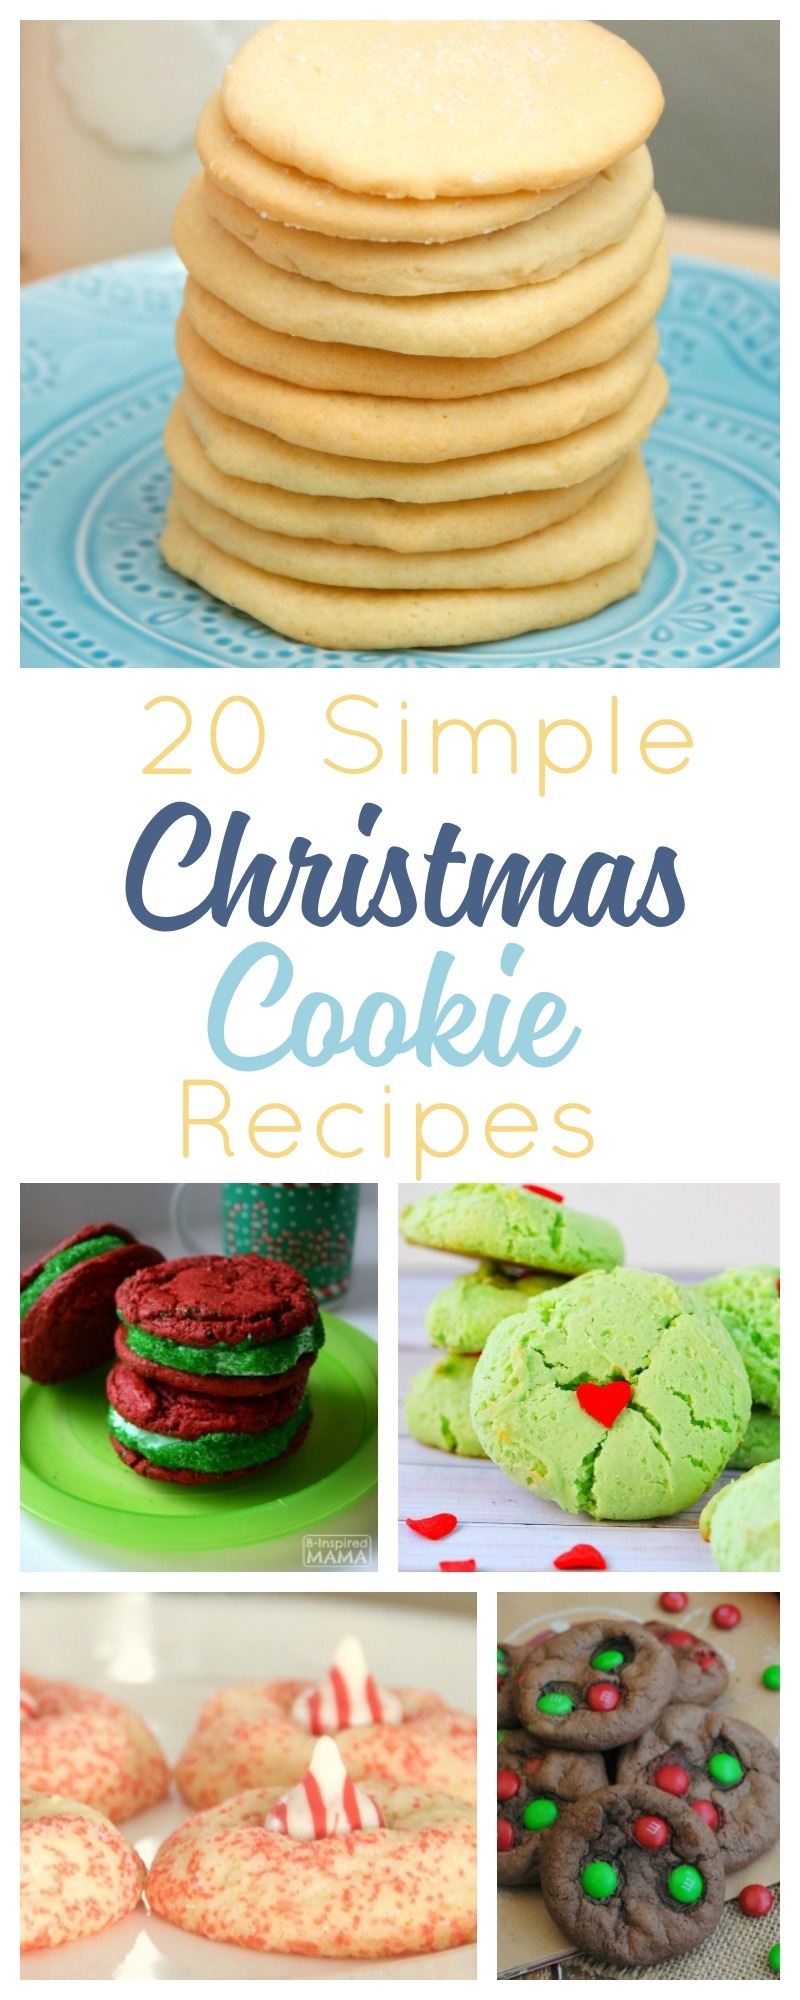 Easy Christmas cookie recipes to help you keep it simple this holiday season 